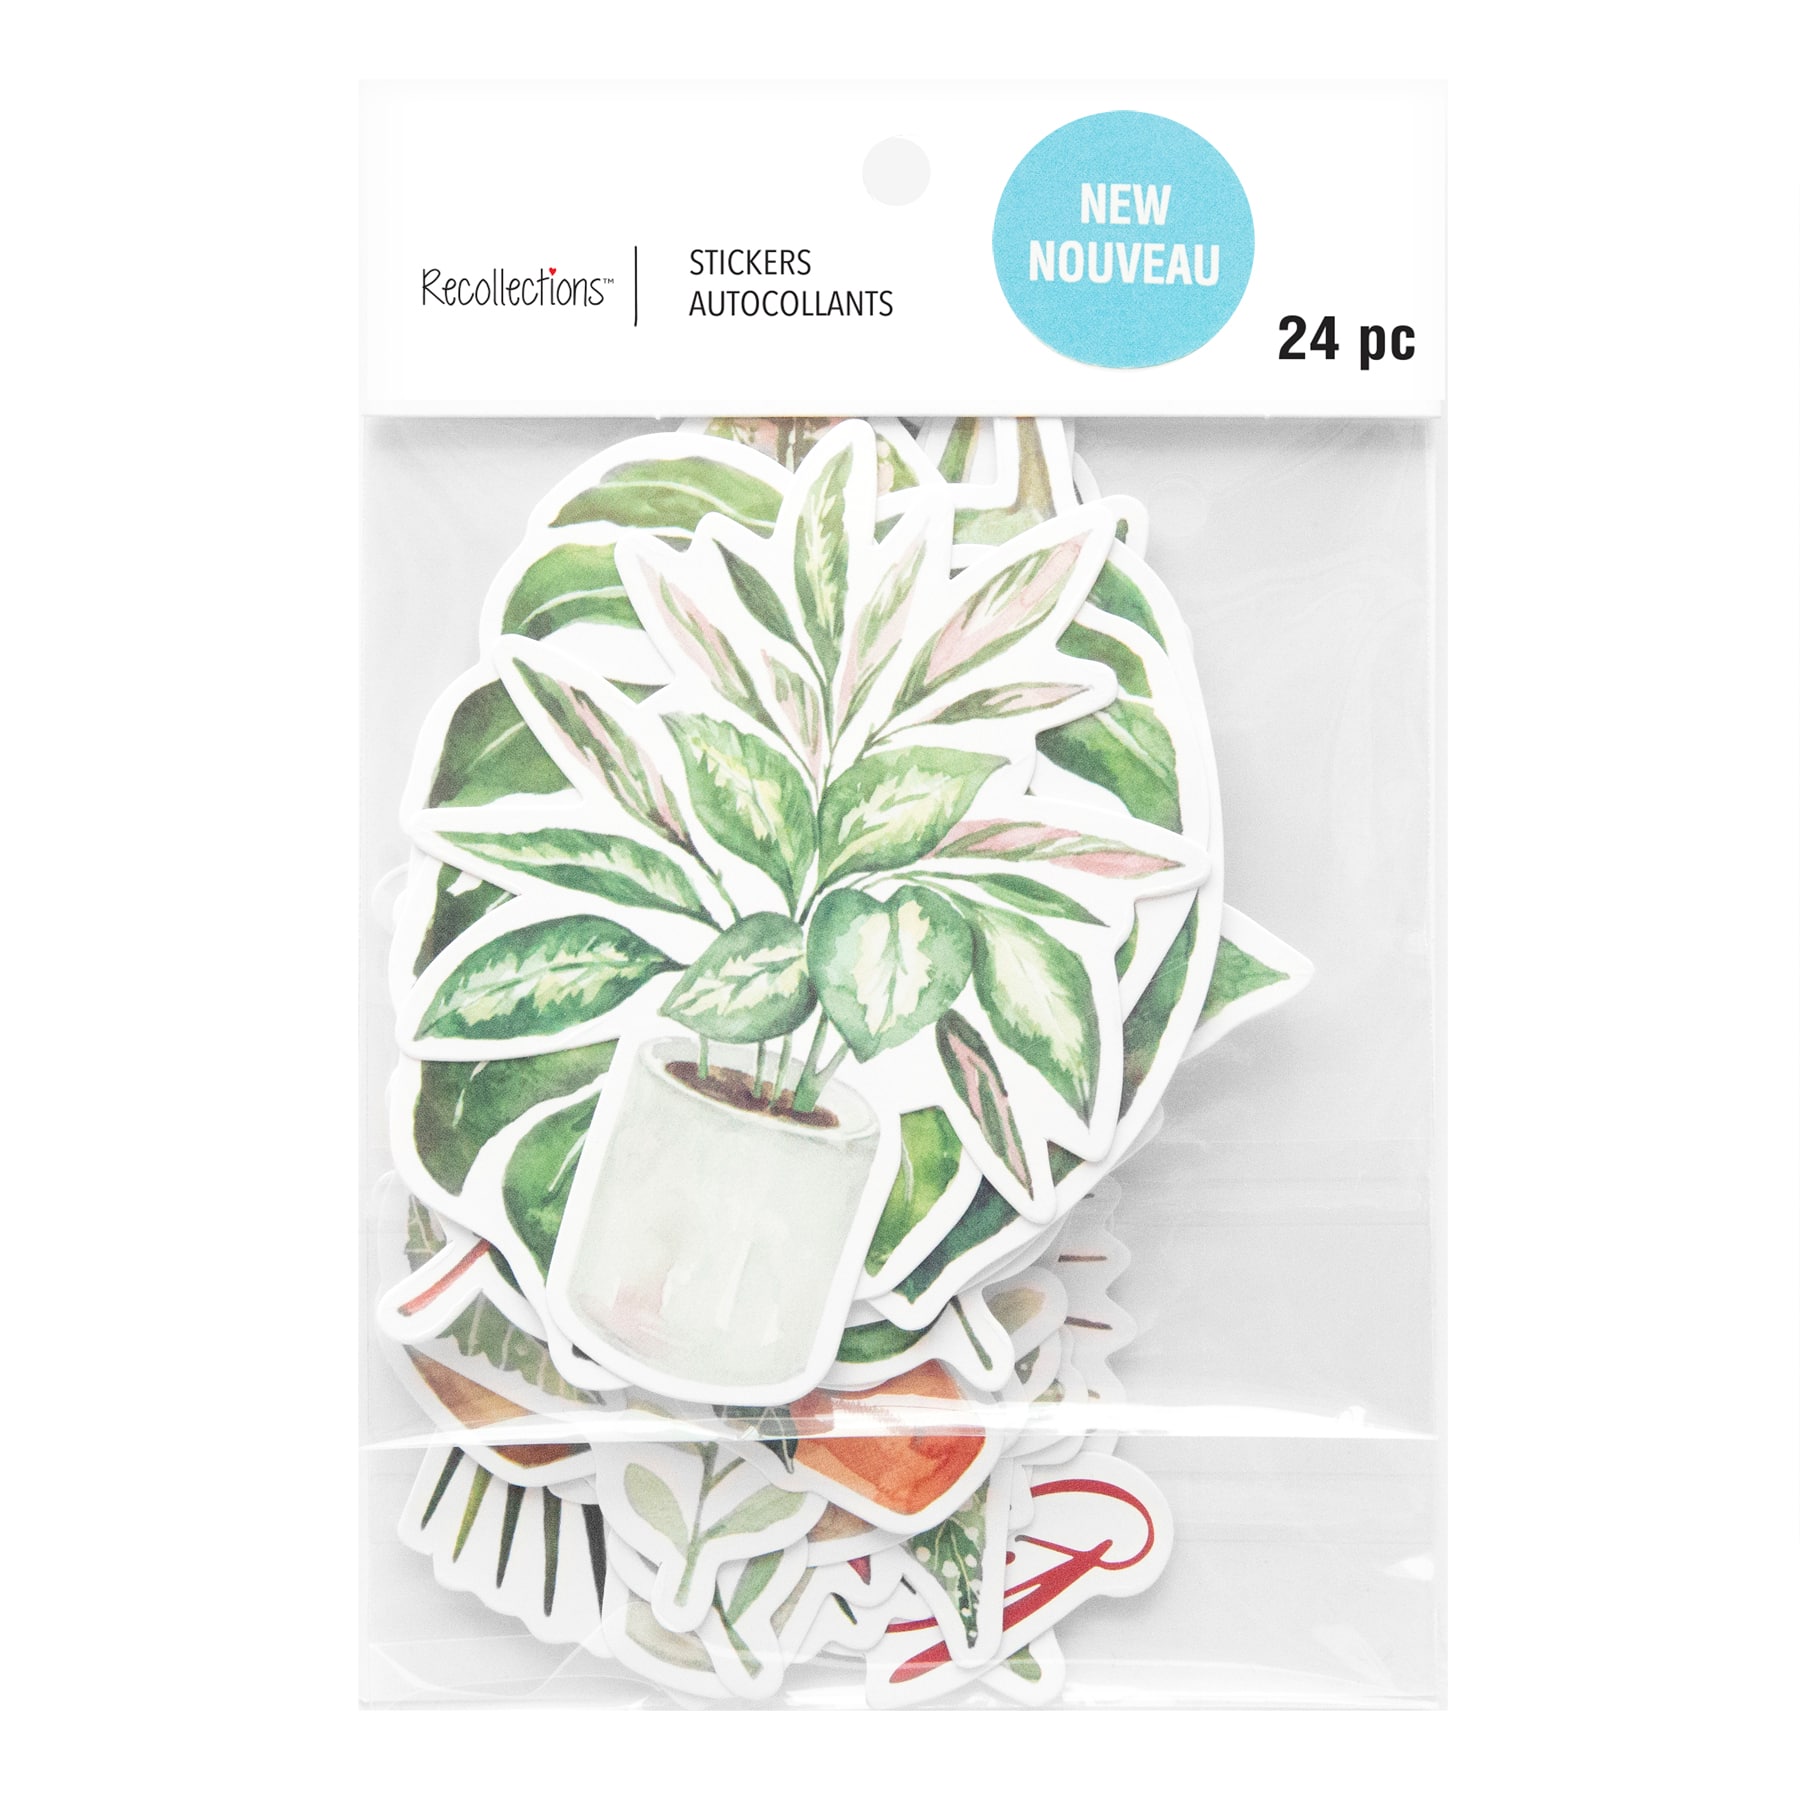 House Plant Stickers by Recollections™